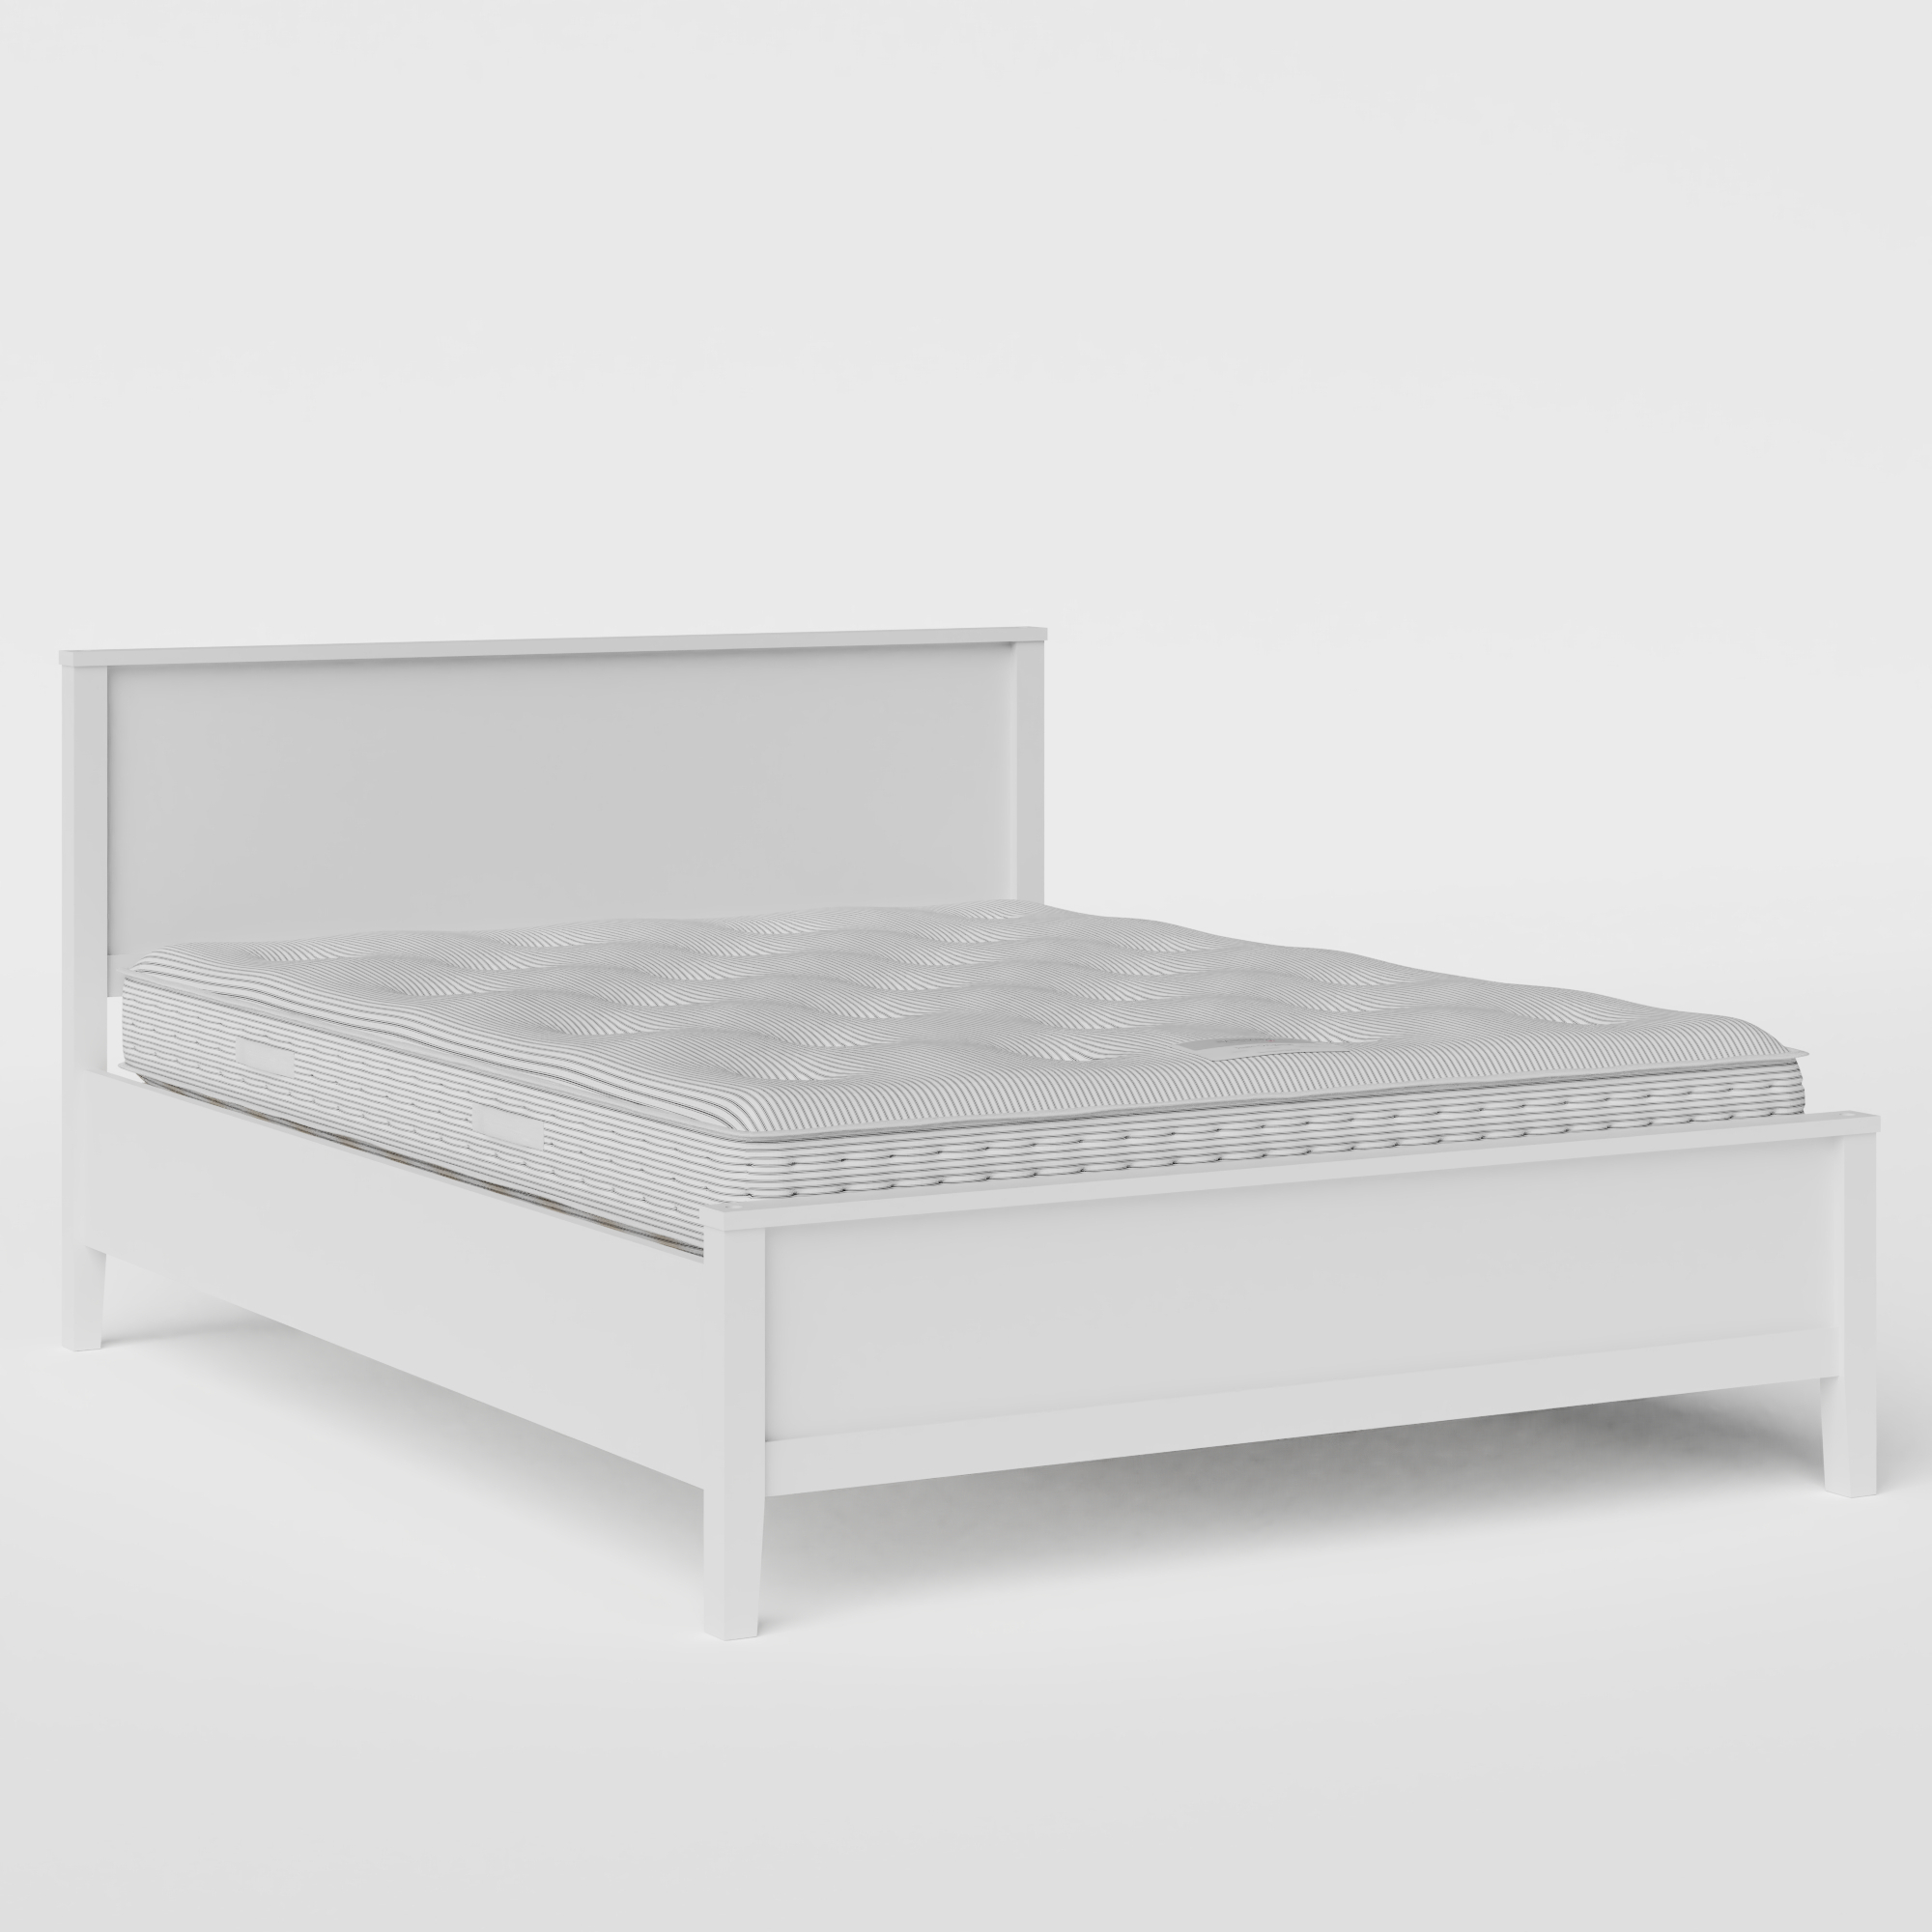 Ramsay Painted painted wood bed in white with Juno mattress